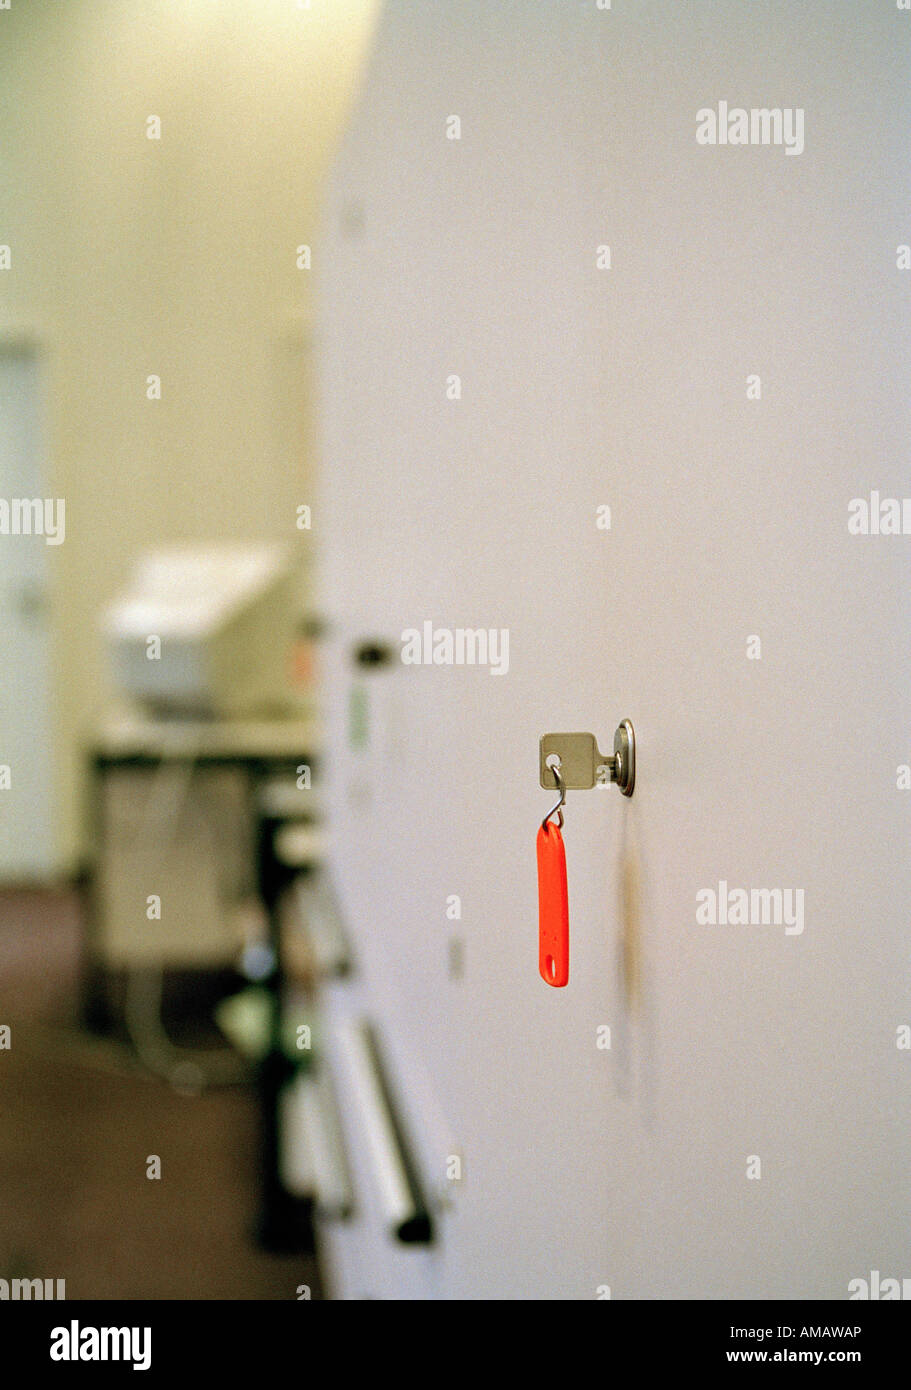 A key hanging in a lock Stock Photo